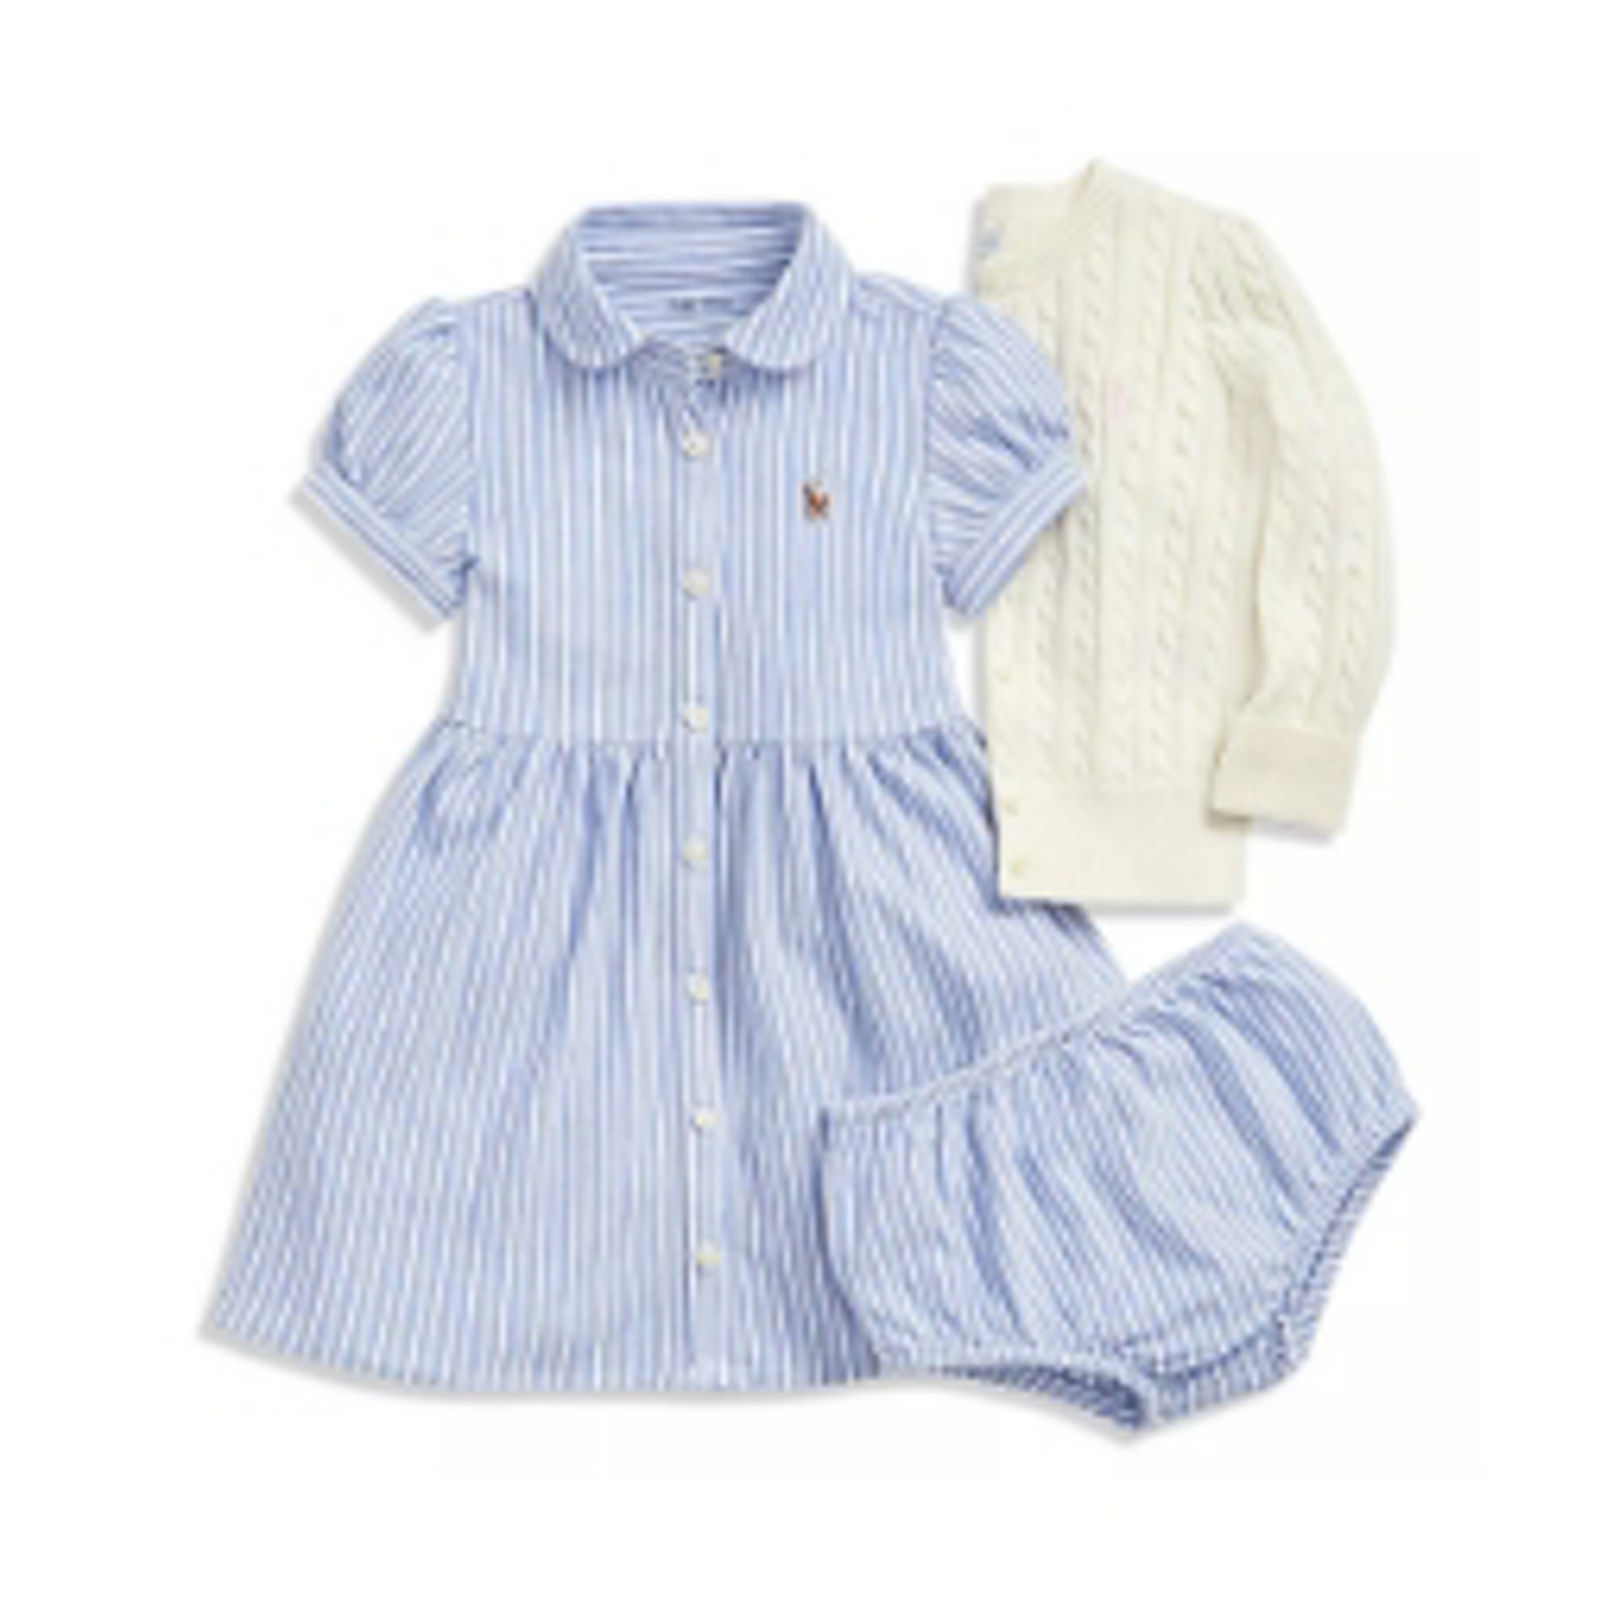 Girls' Clothes (Size 7-16) - Bloomingdale's